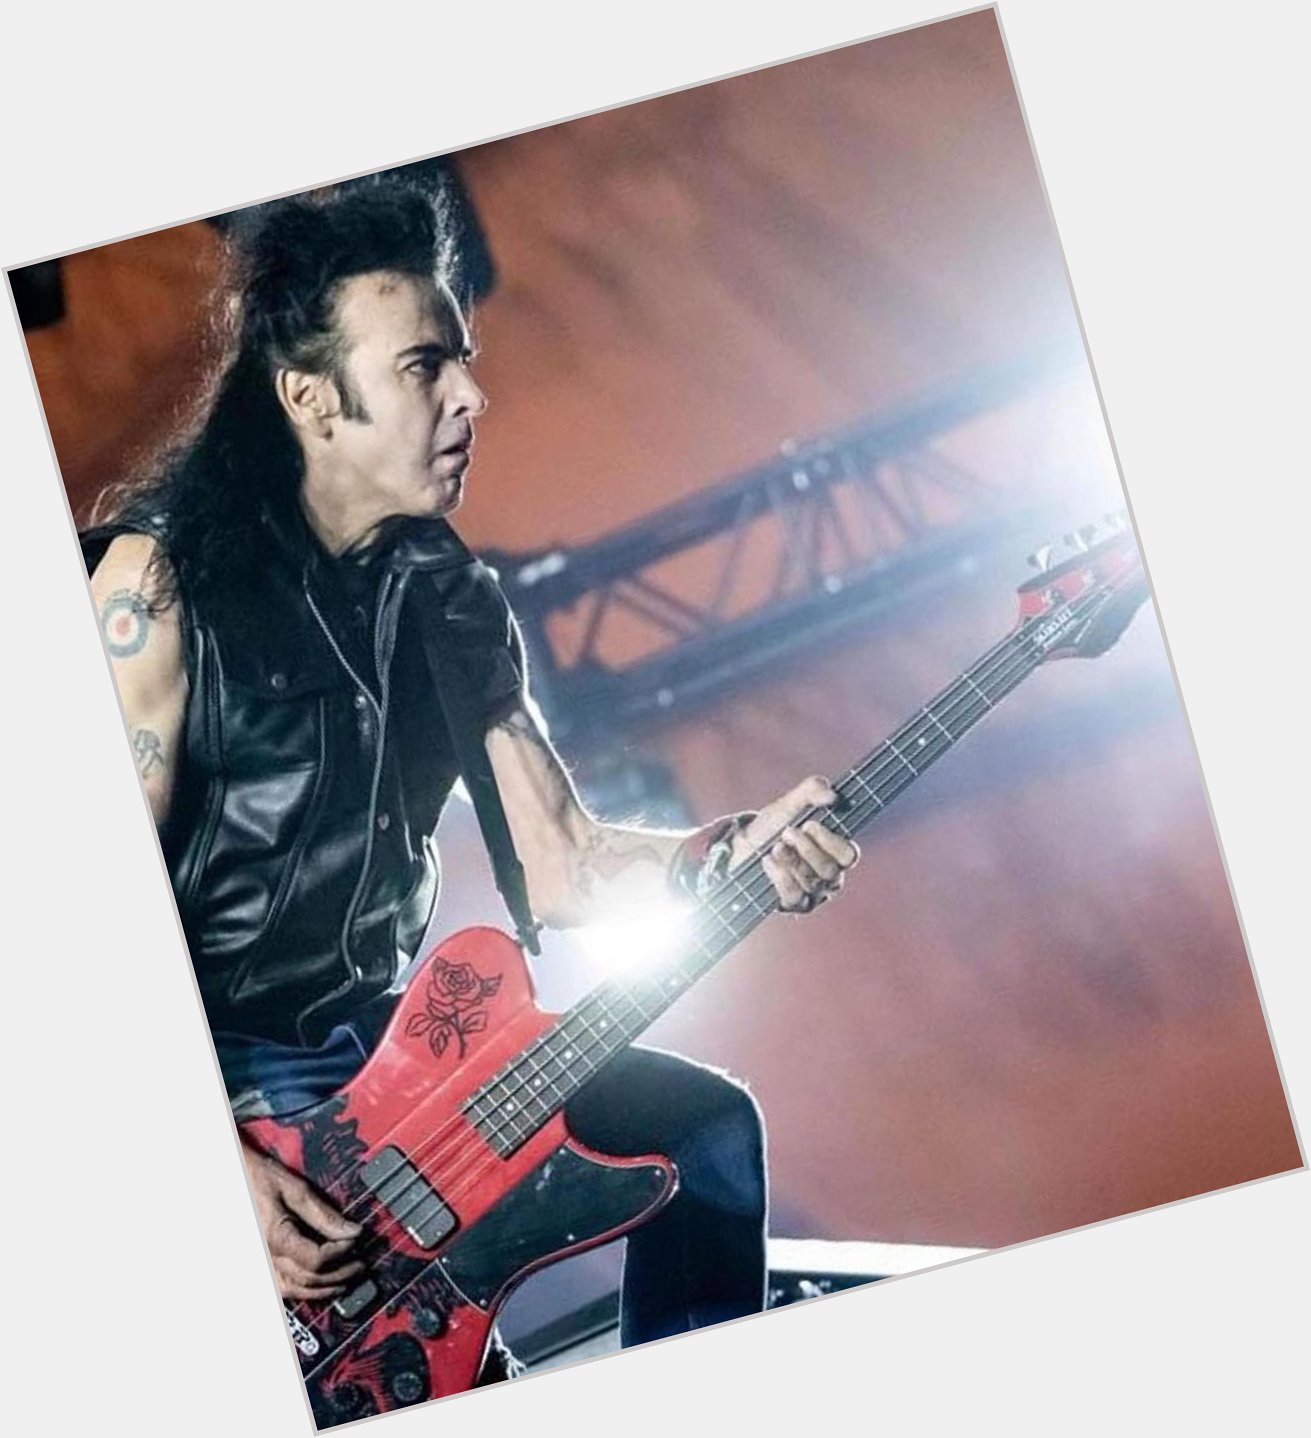 Happy birthday to Simon Gallup of The Cure 
(1 June 1960). 